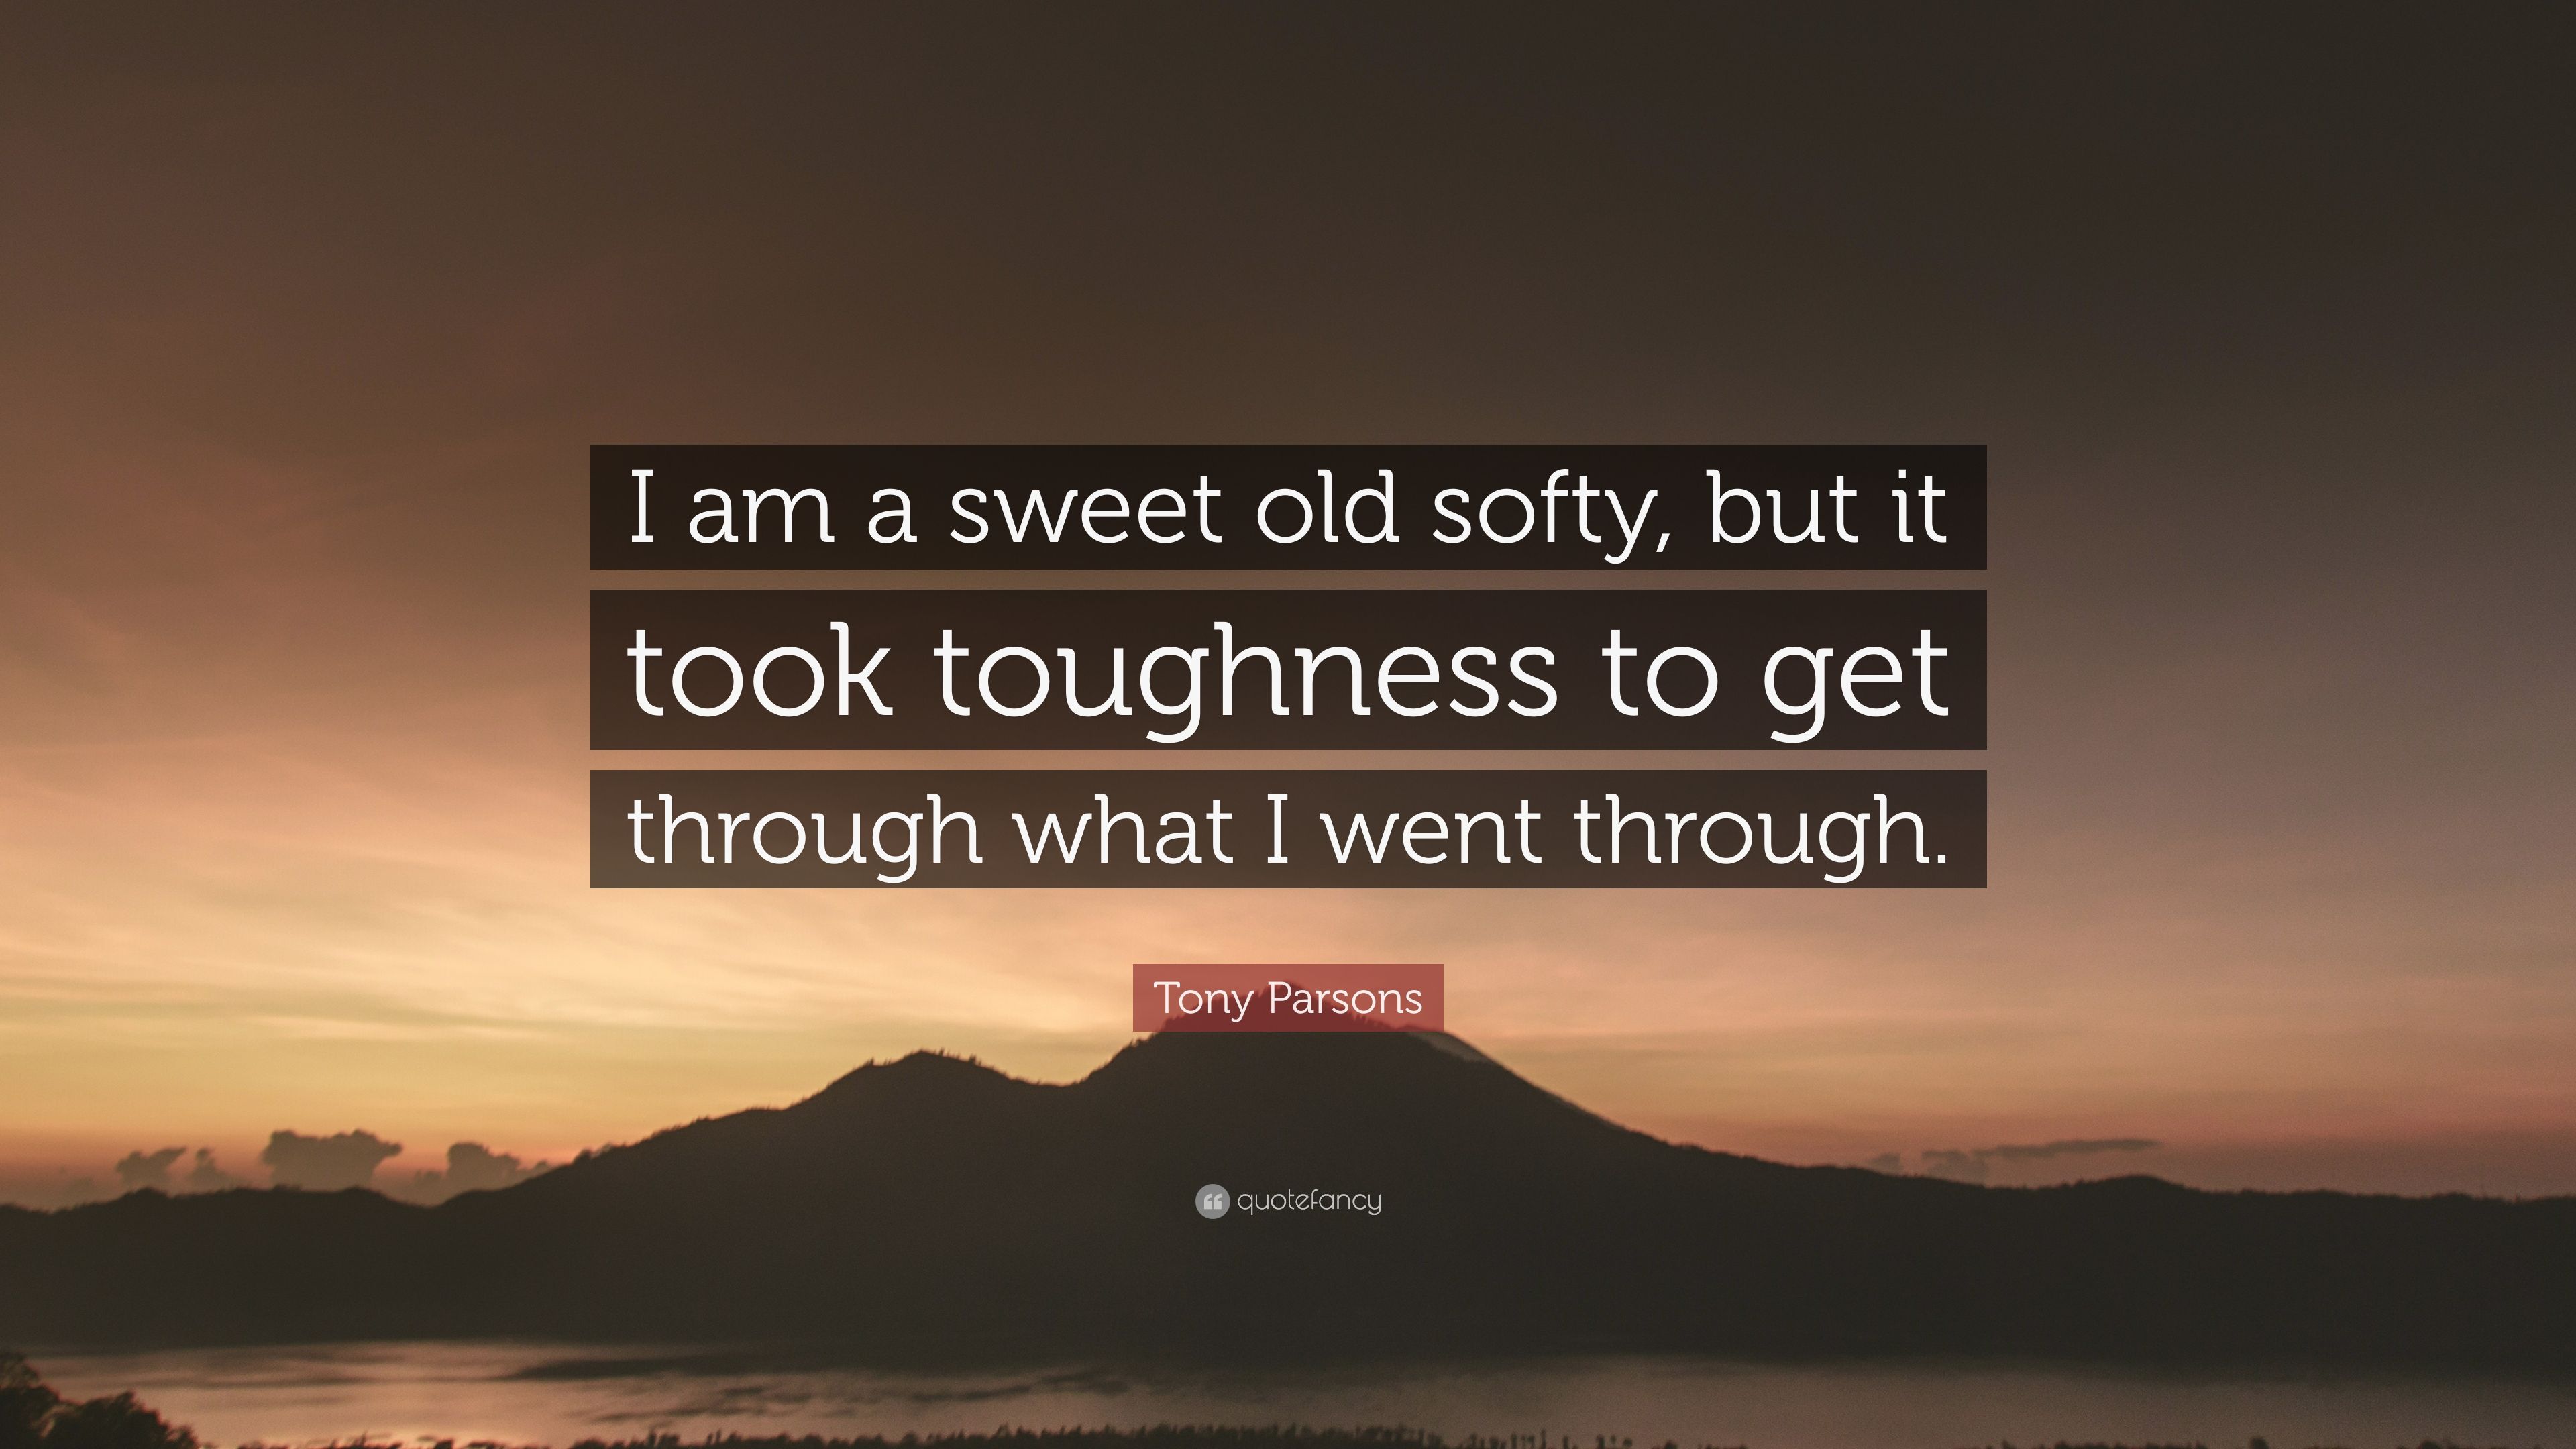 Tony Parsons Quote: “I am a sweet old softy, but it took toughness